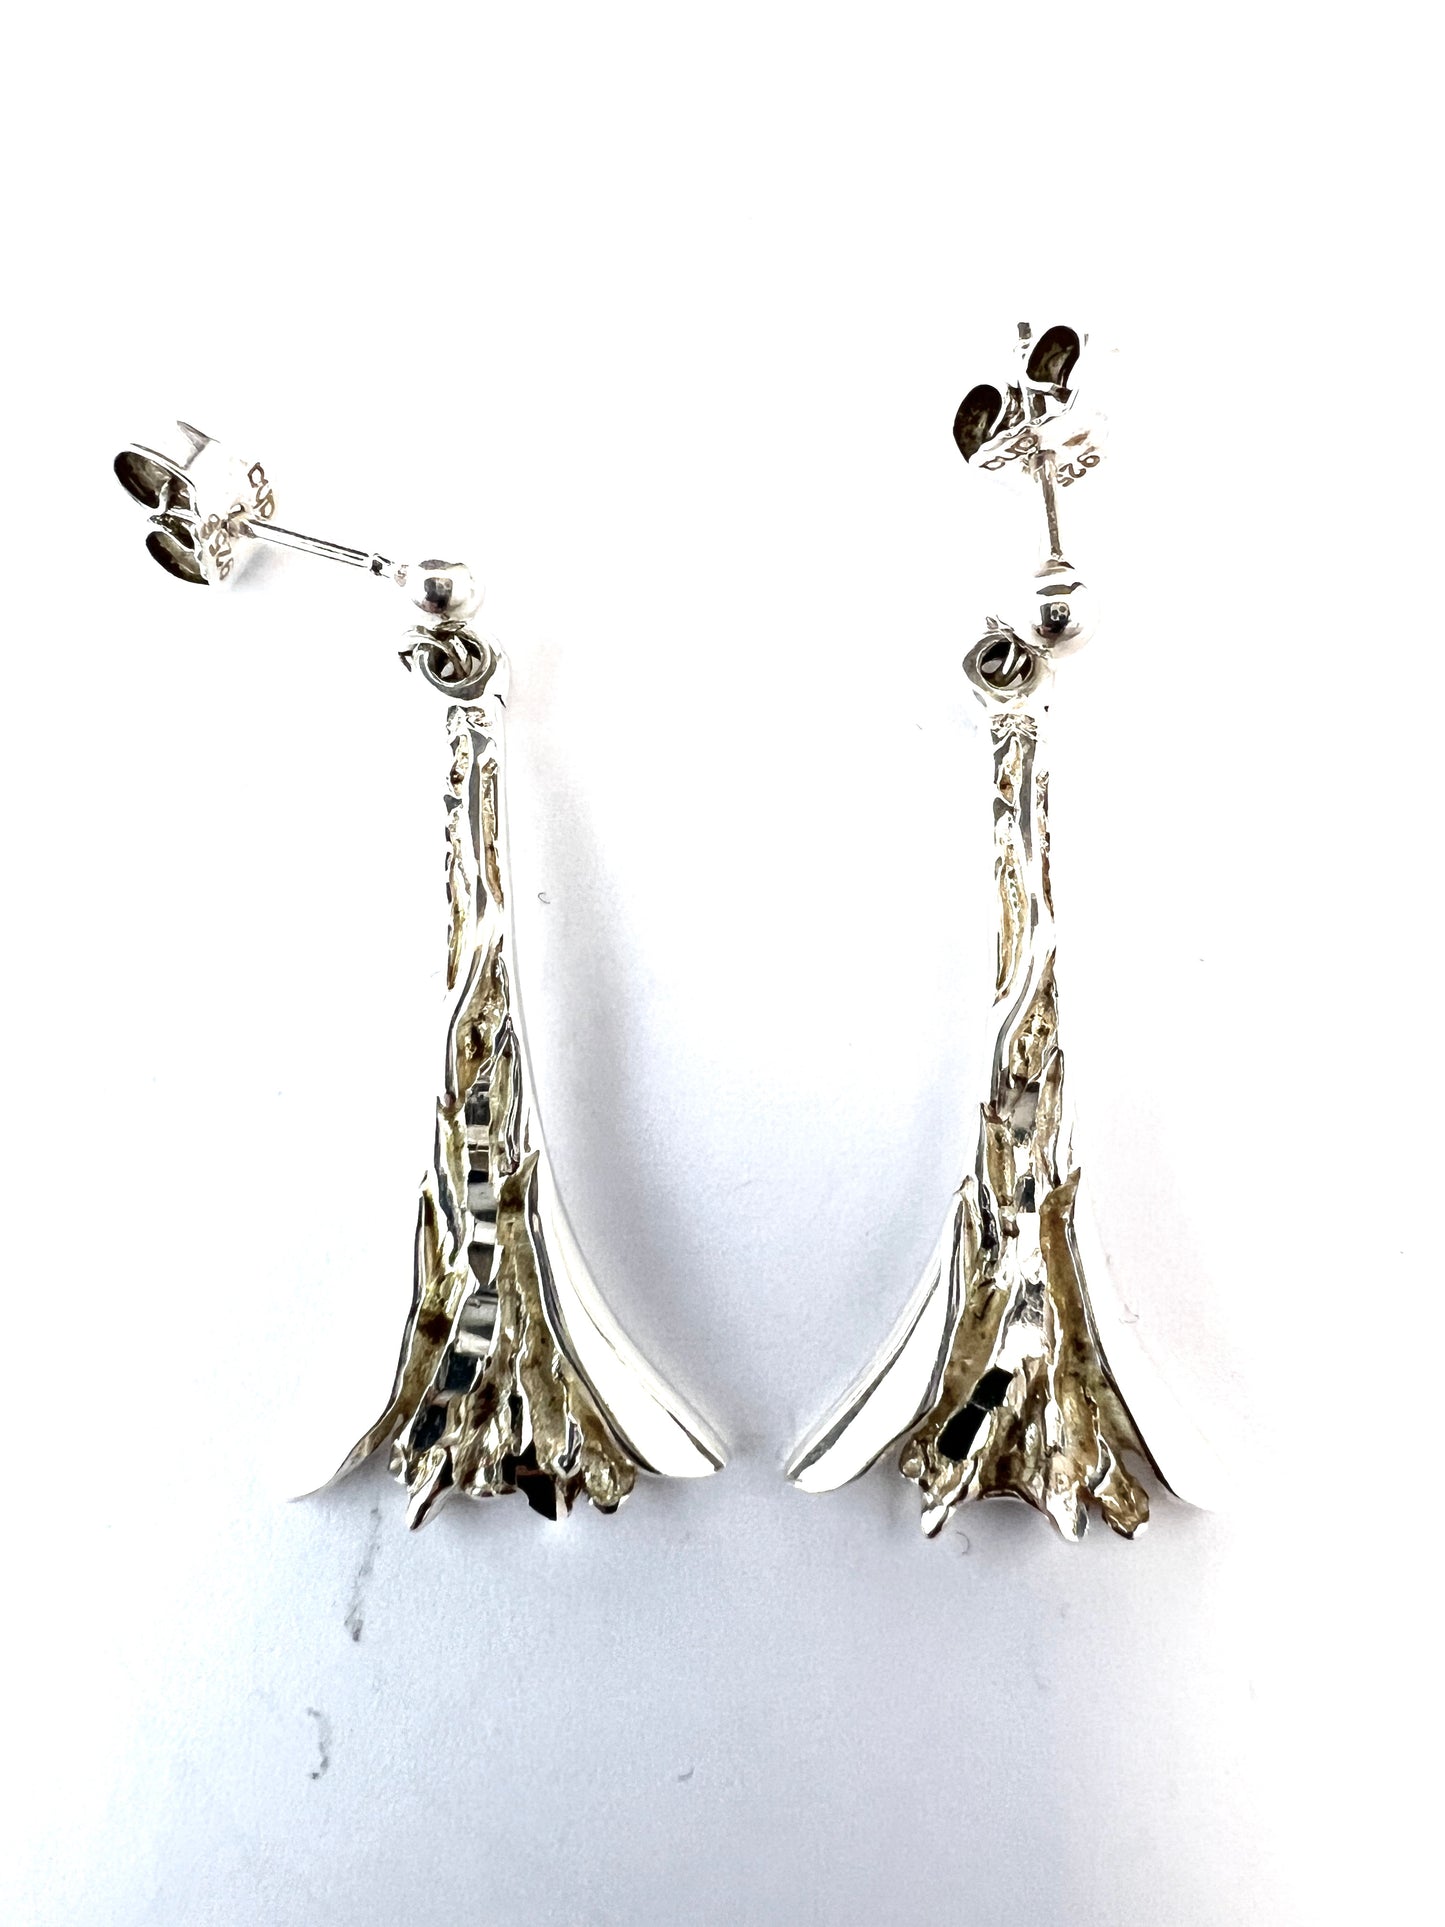 Astri Holthe, Norway. Vintage Sterling Silver Earrings.